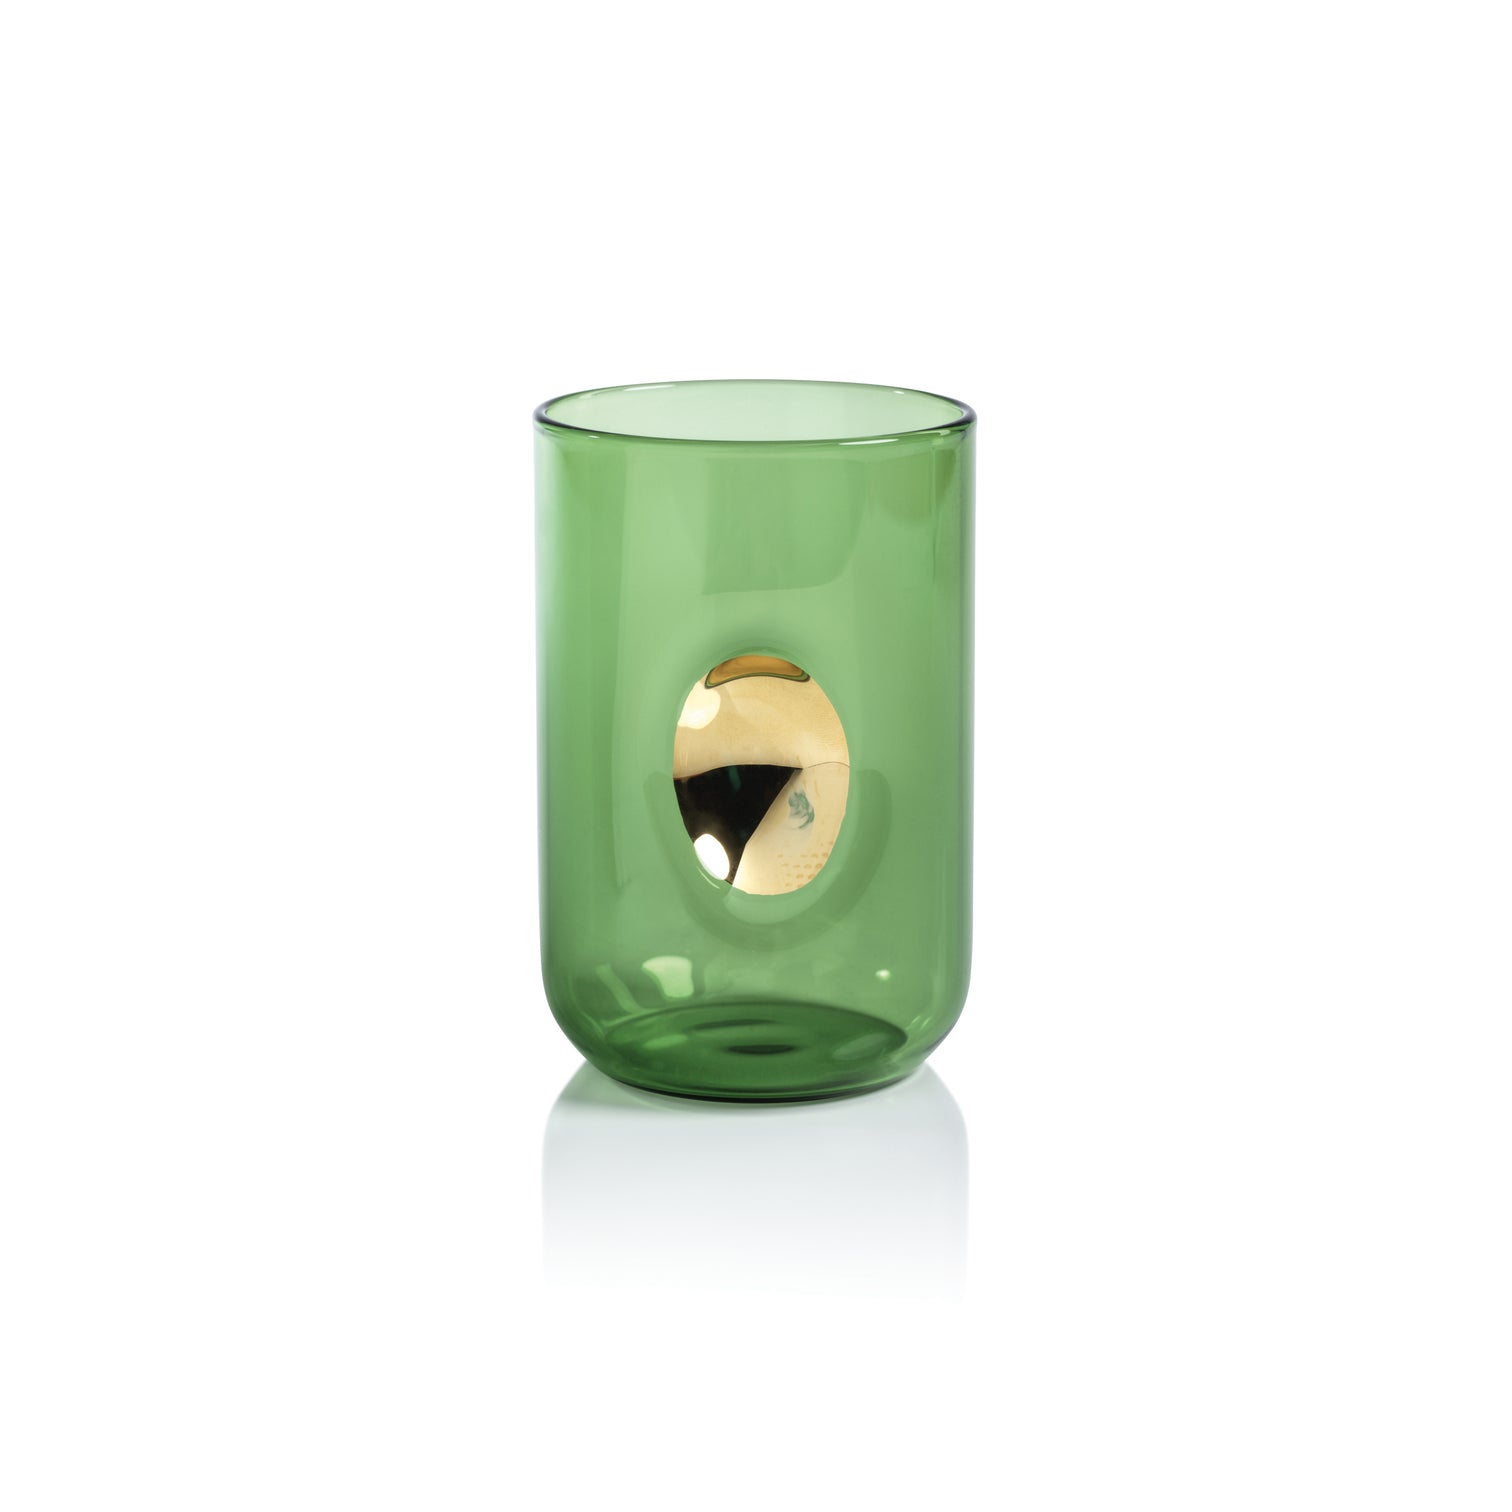 Aperitivo Tumbler with Gold Accent - Cactus Green - Set of 4